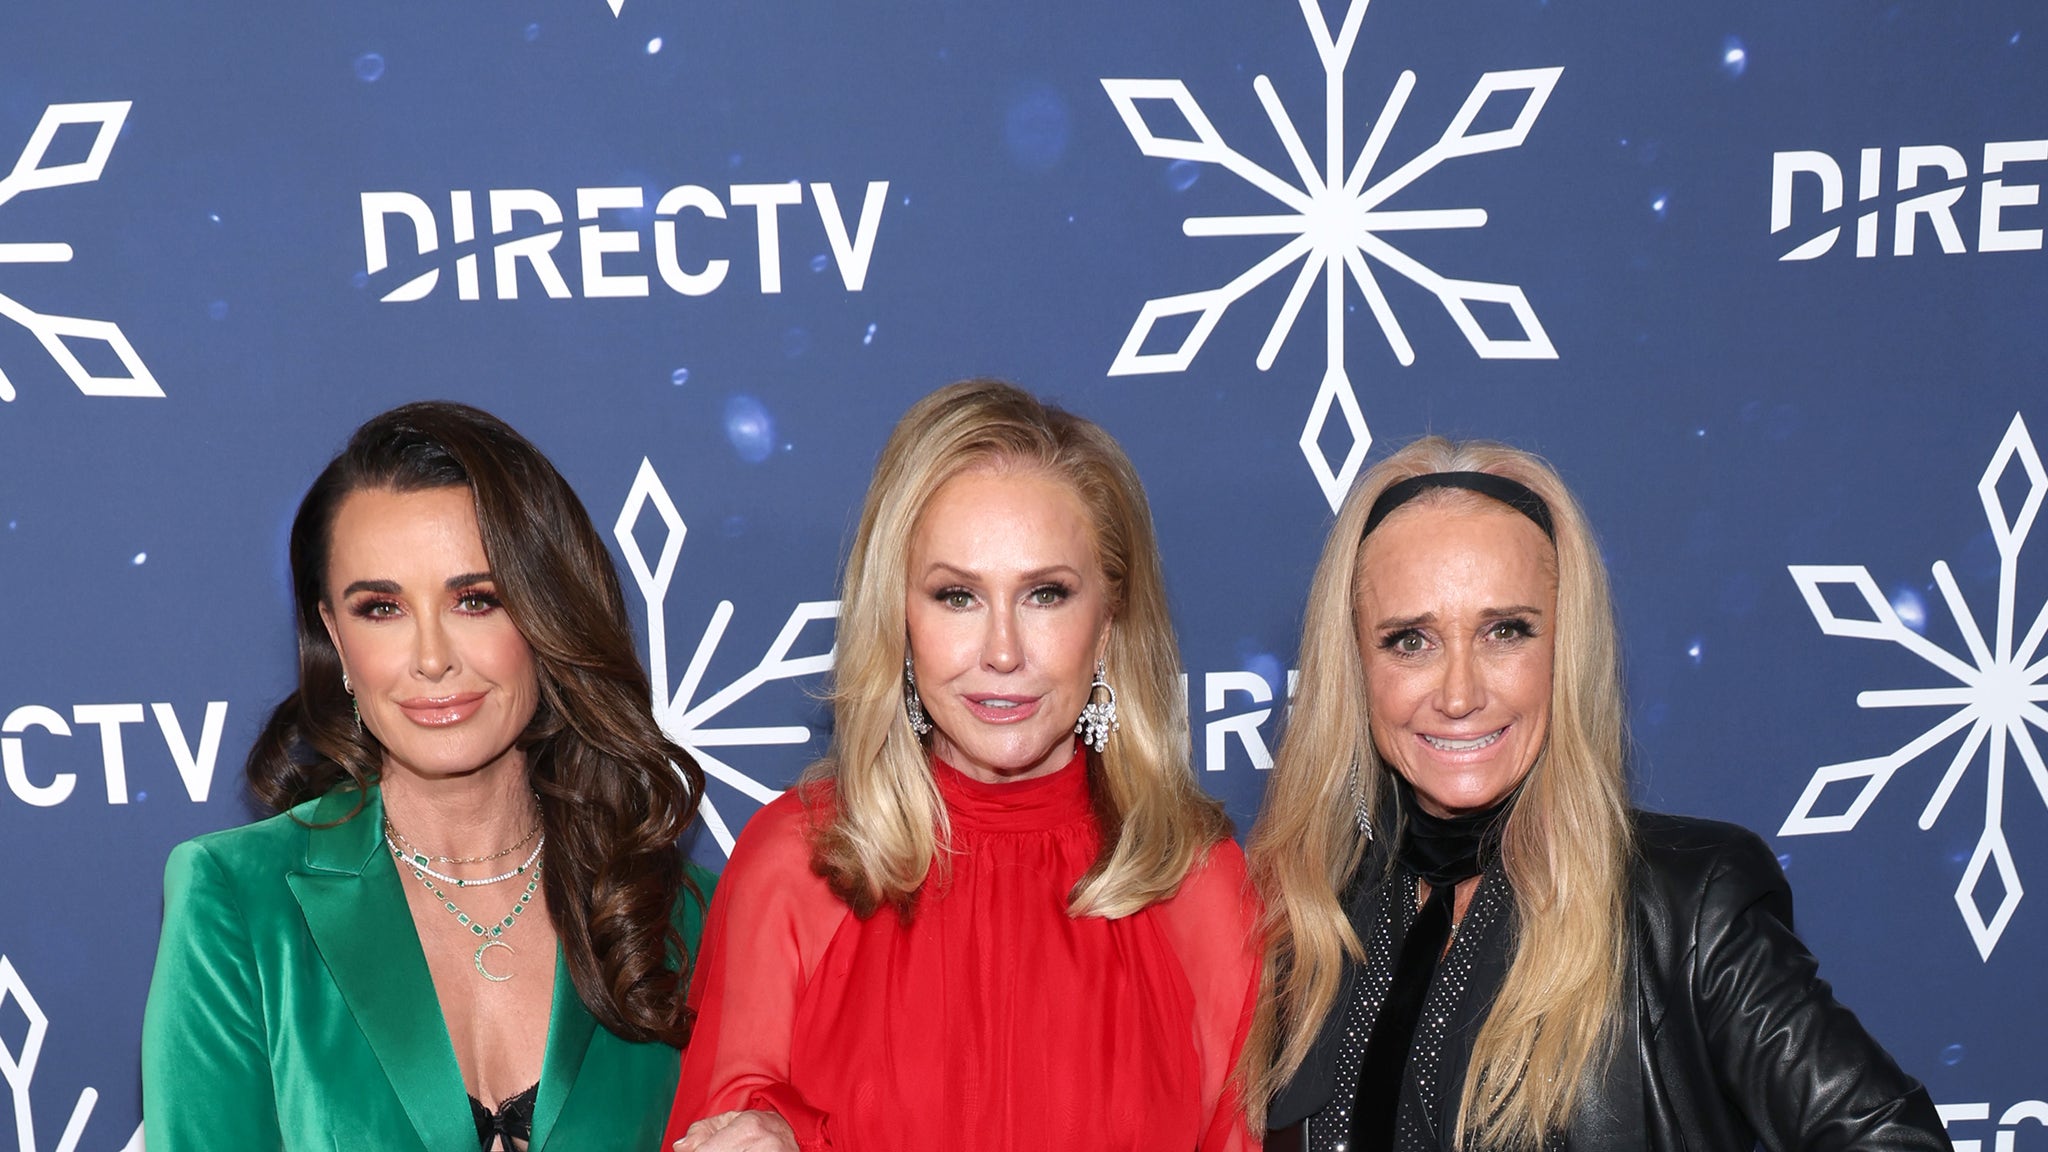 Kathy Hilton's Go-To Holiday Gifts, from DirecTV and Caviar to Jewelry –  The Hollywood Reporter